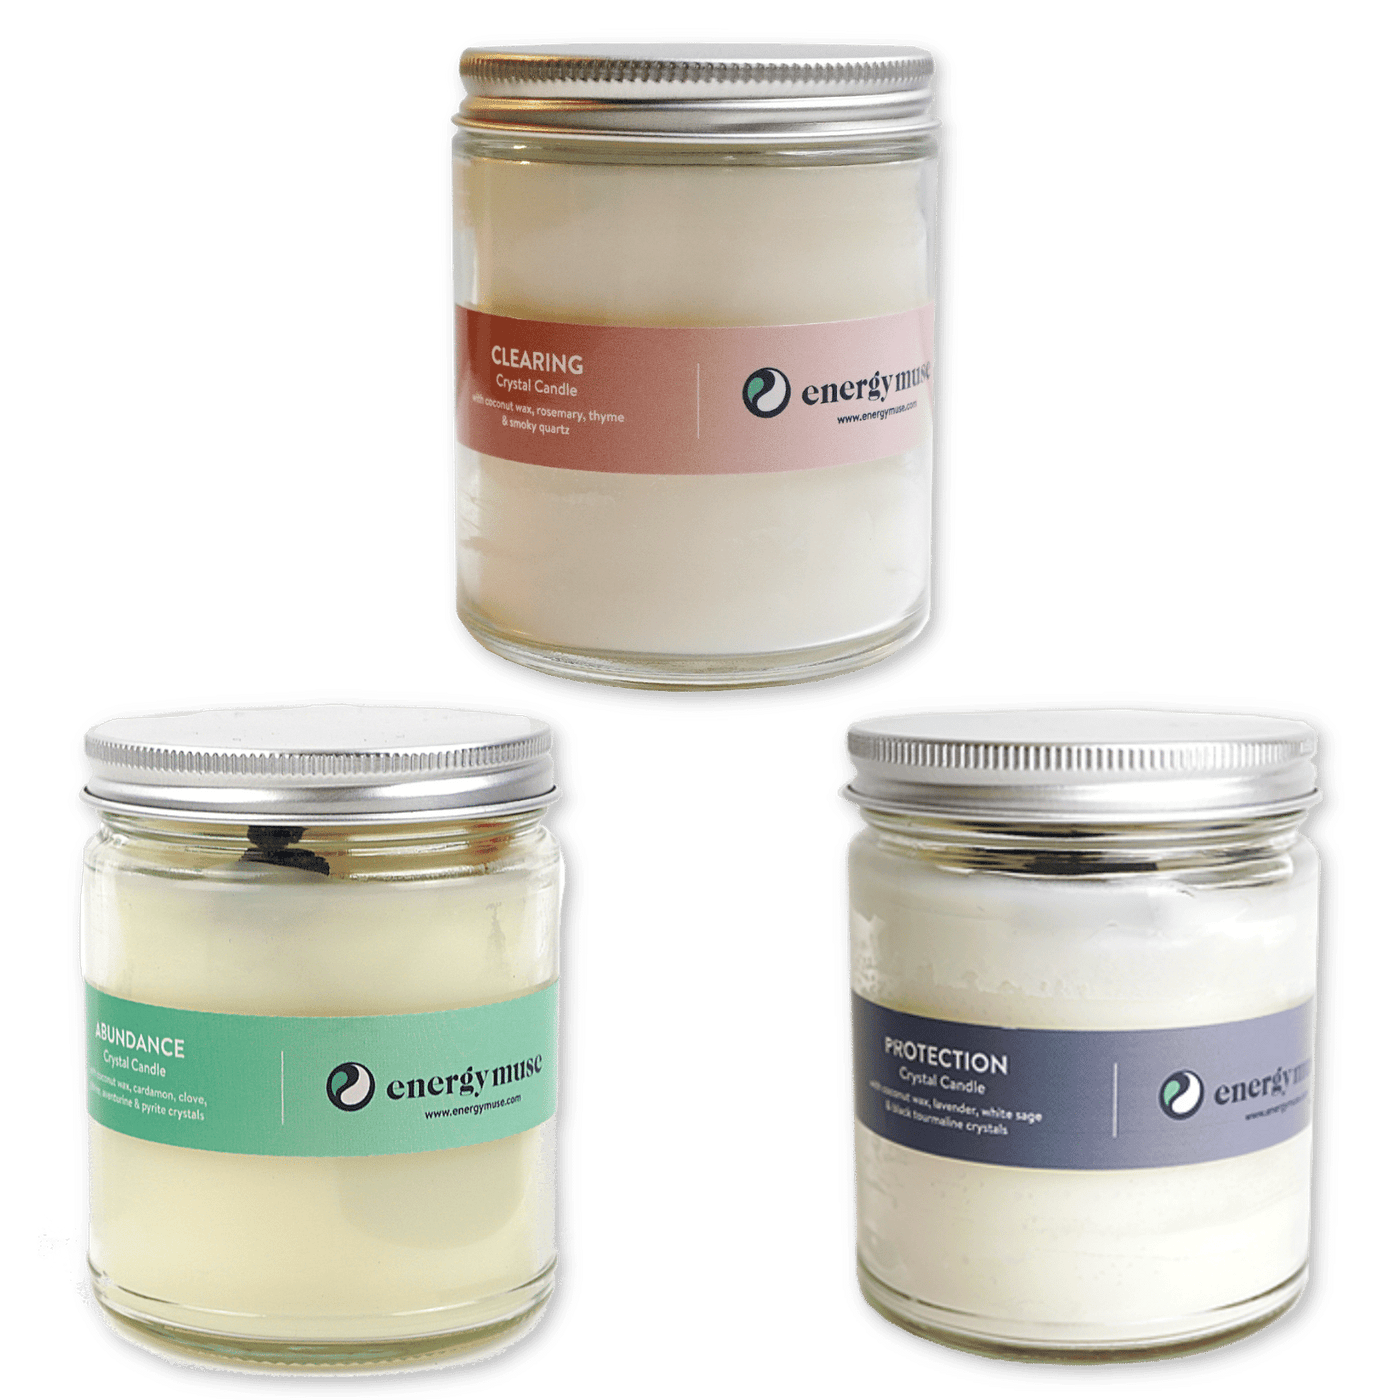 The Candle Lover's Trio